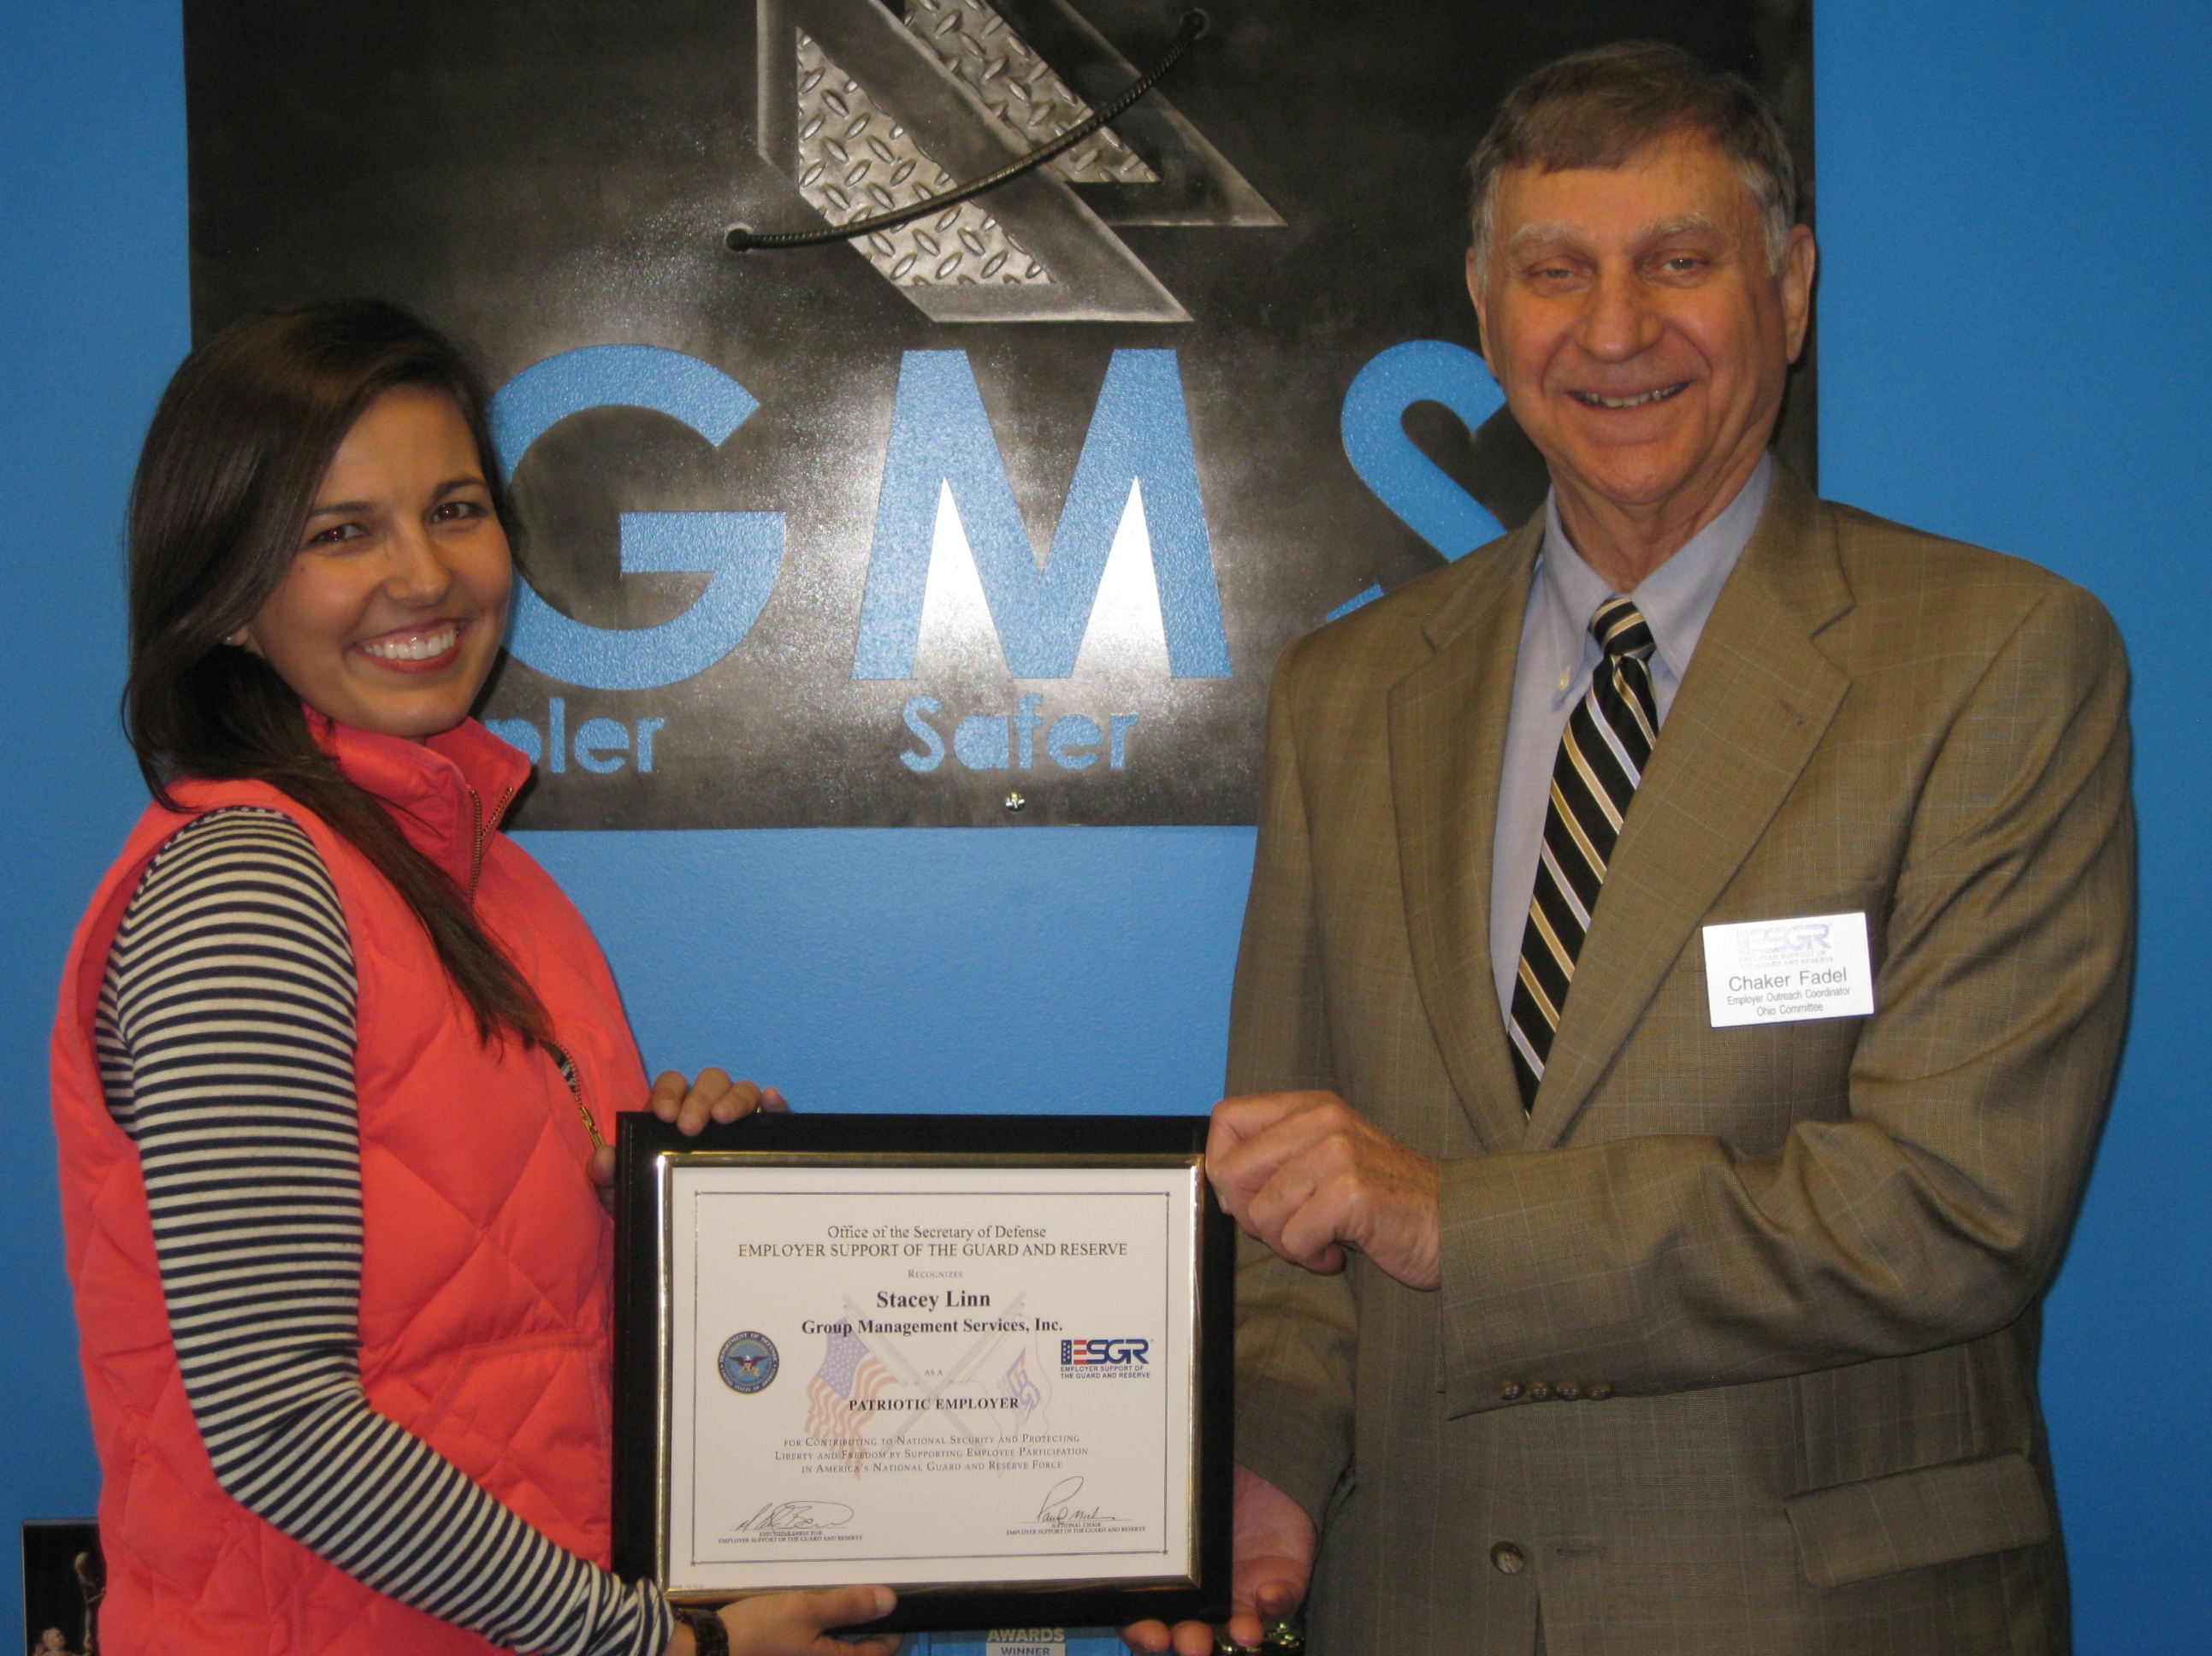 Image of Stacey Larotonda receiving her Patriotic Employer award from retired USAF Lieutenant, Colonel Chaker Fadel.